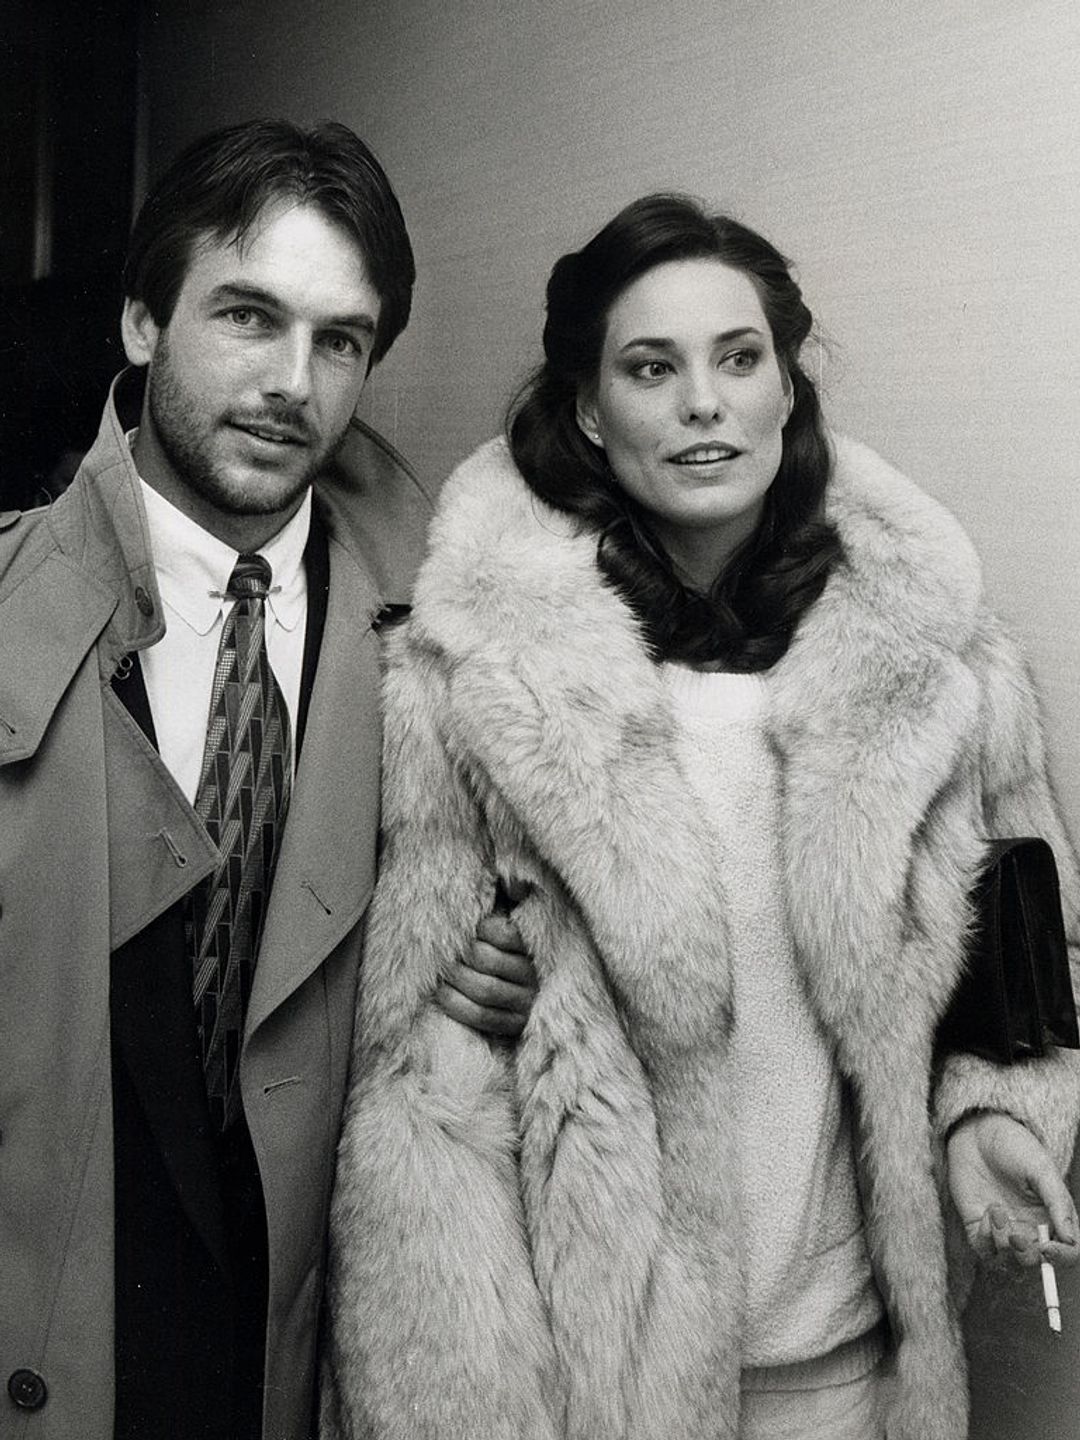 Mark Harmon and Christina Raines at an event. She is wearing a fur coat and he is wearing a trench coat over his suit. 